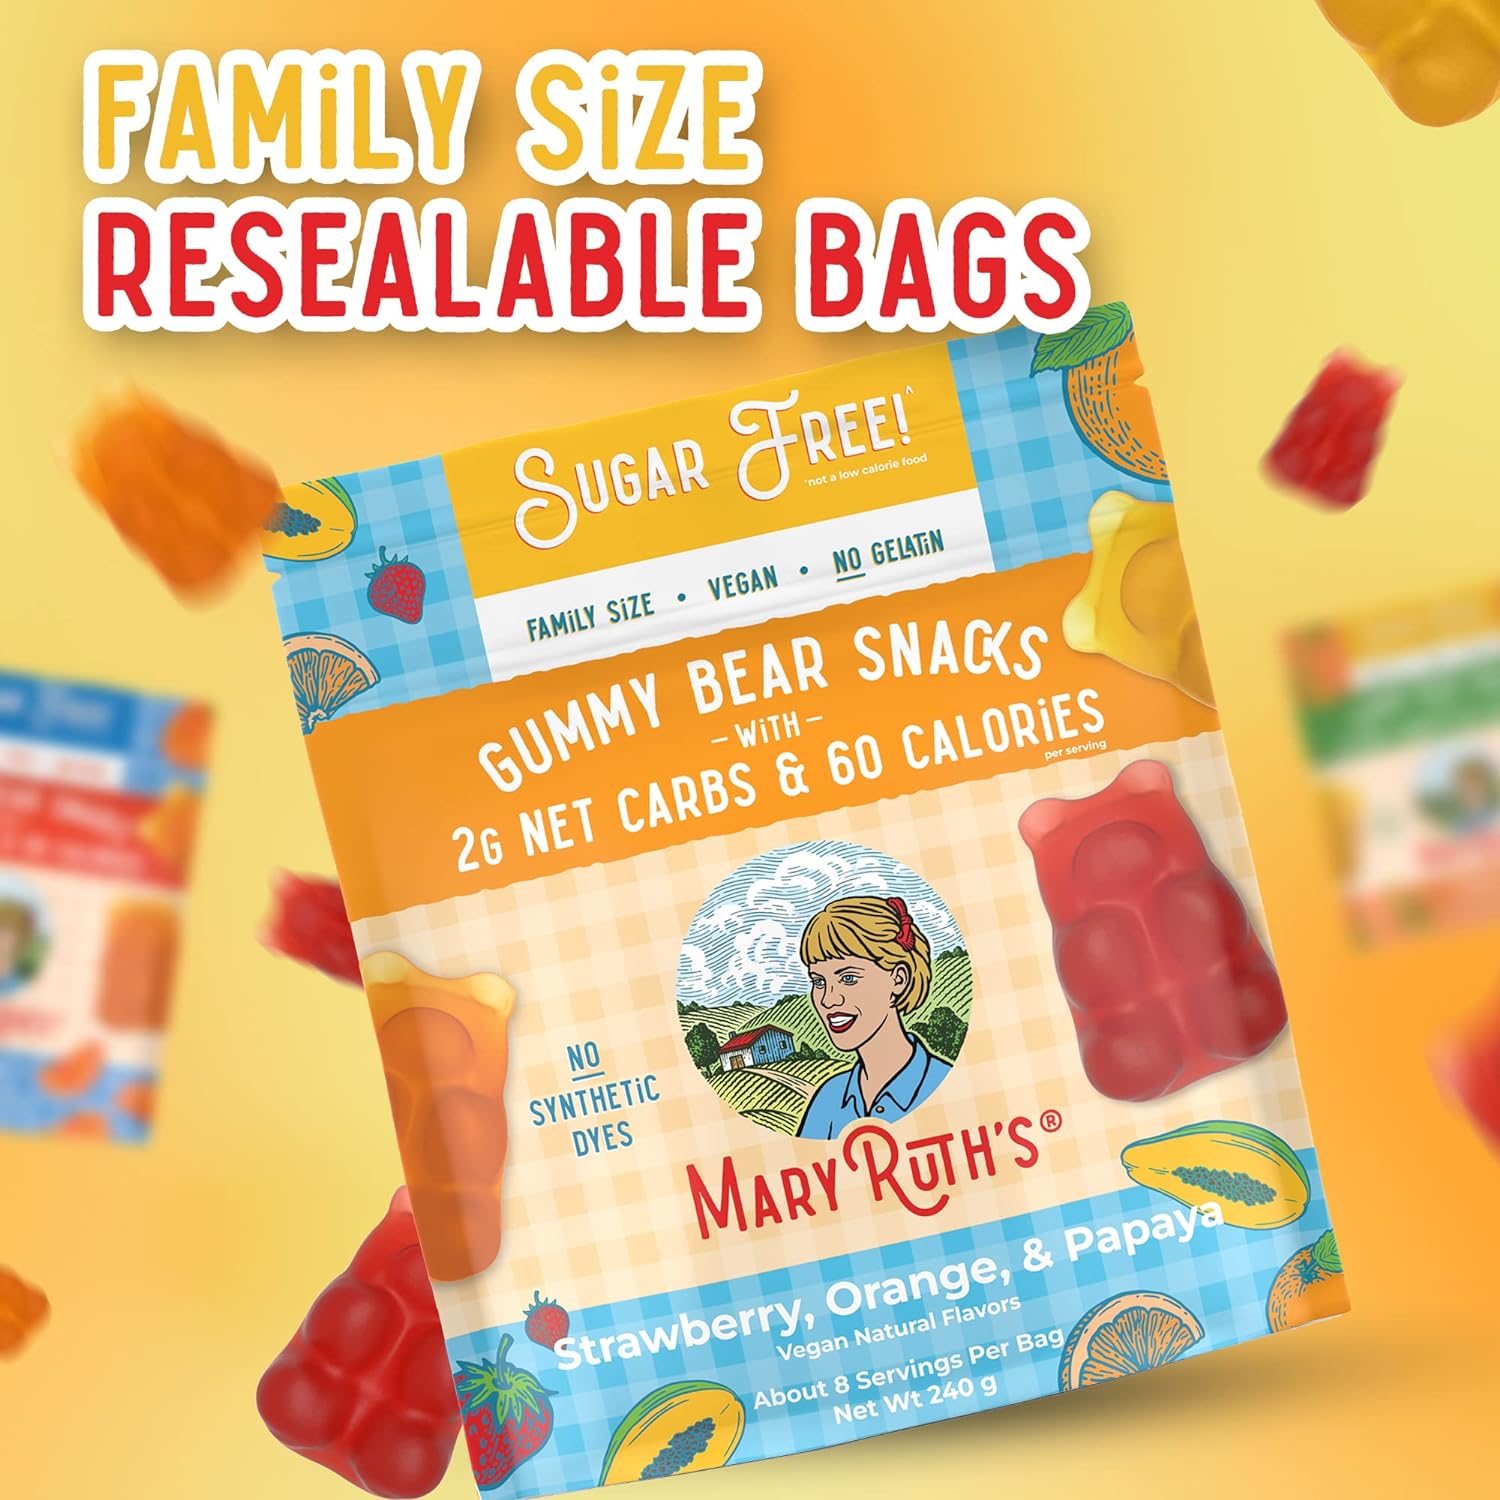 MaryRuth Organics Sugar Free Gummy Bears Snacks | Delicious with Electrolytes and Fiber | Made with Organic Ingredients | Variety Pack | Vegan | Gluten Free | Non-GMO | Family Size | 240 Grams